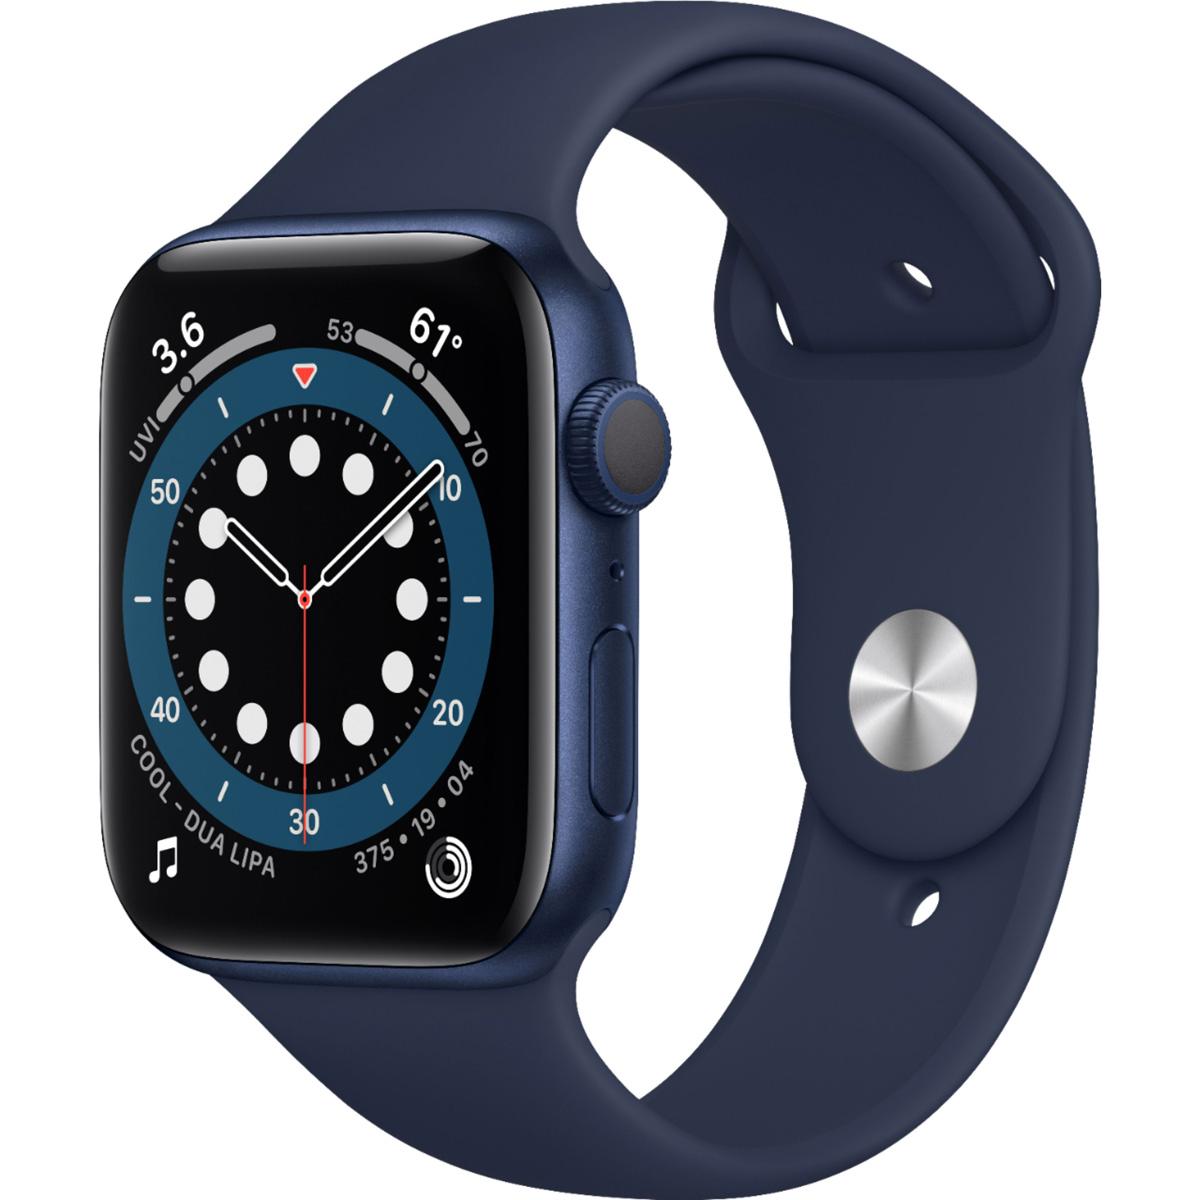 Apple Watch Series 6 40mm Product Blue Smartwatch for $339 Shipped